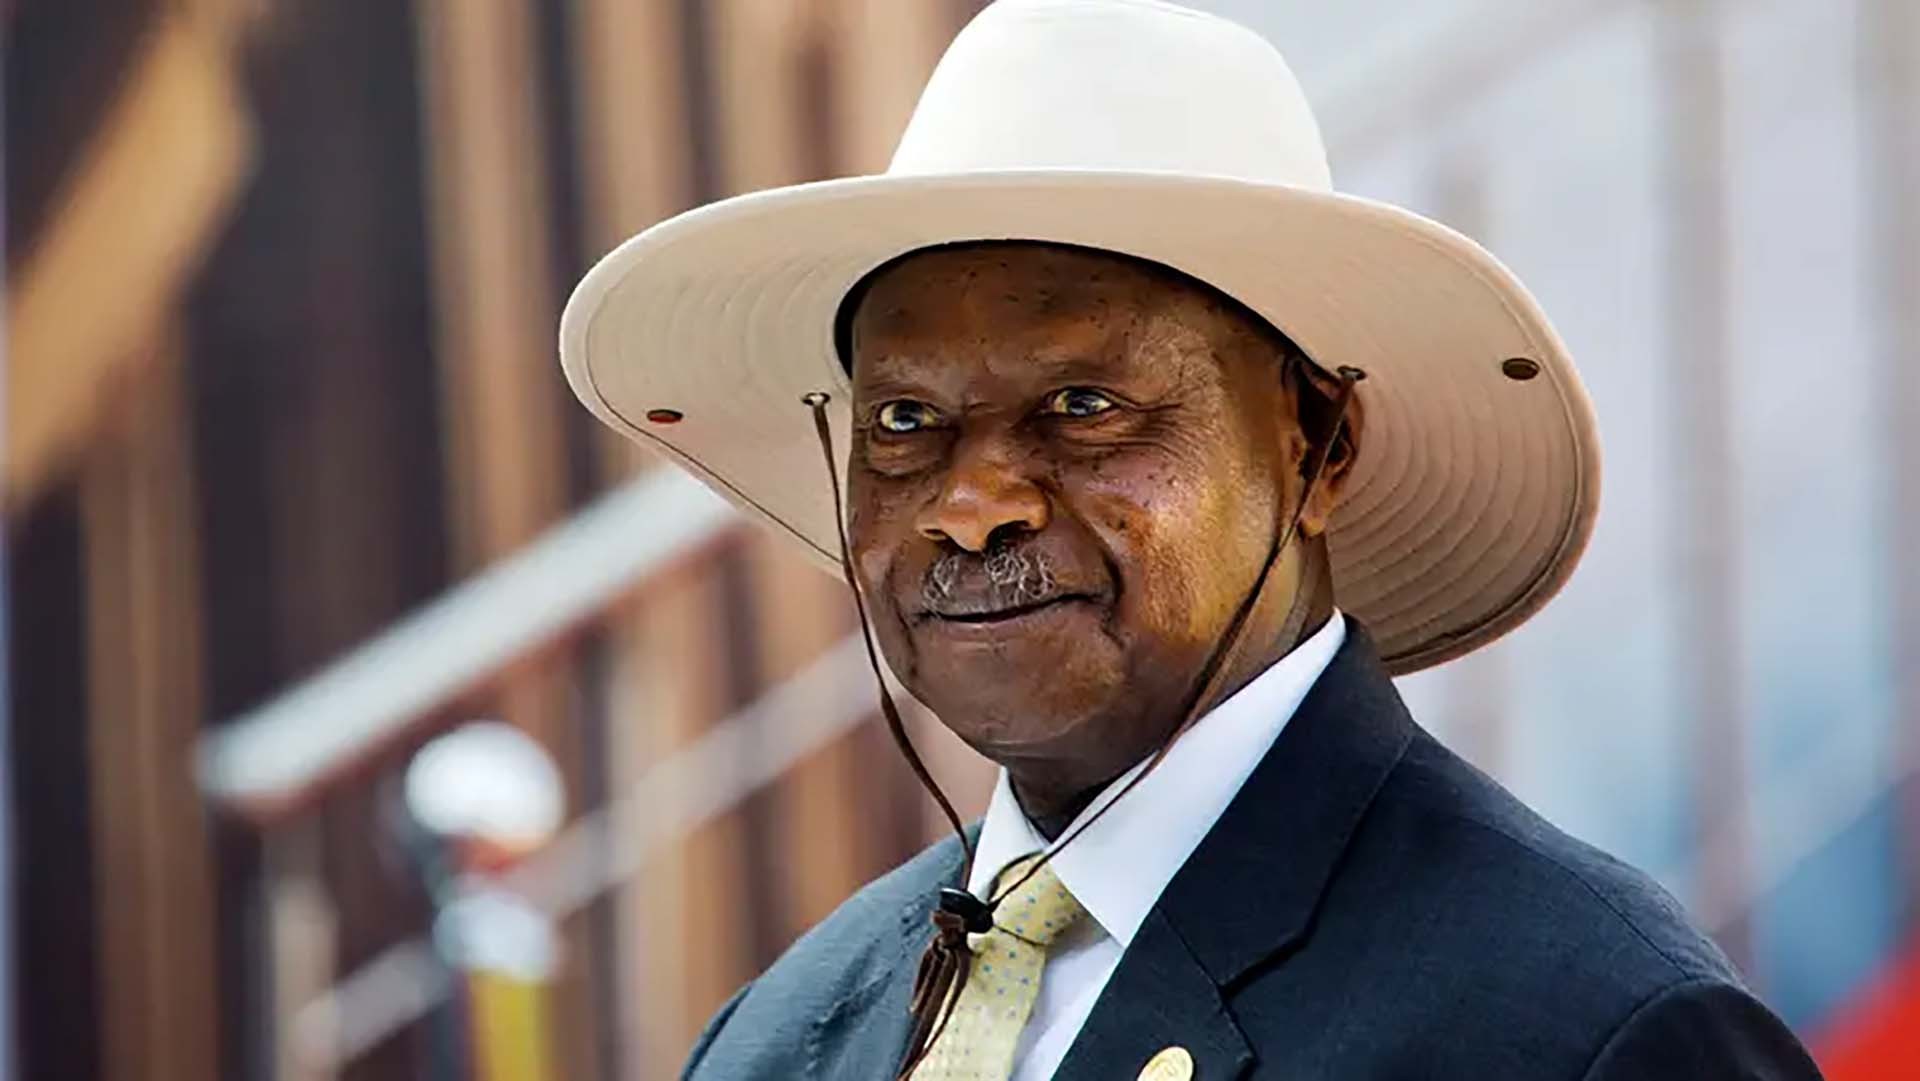 Uganda President to pay official visit to Vietnam from Nov. 23-25